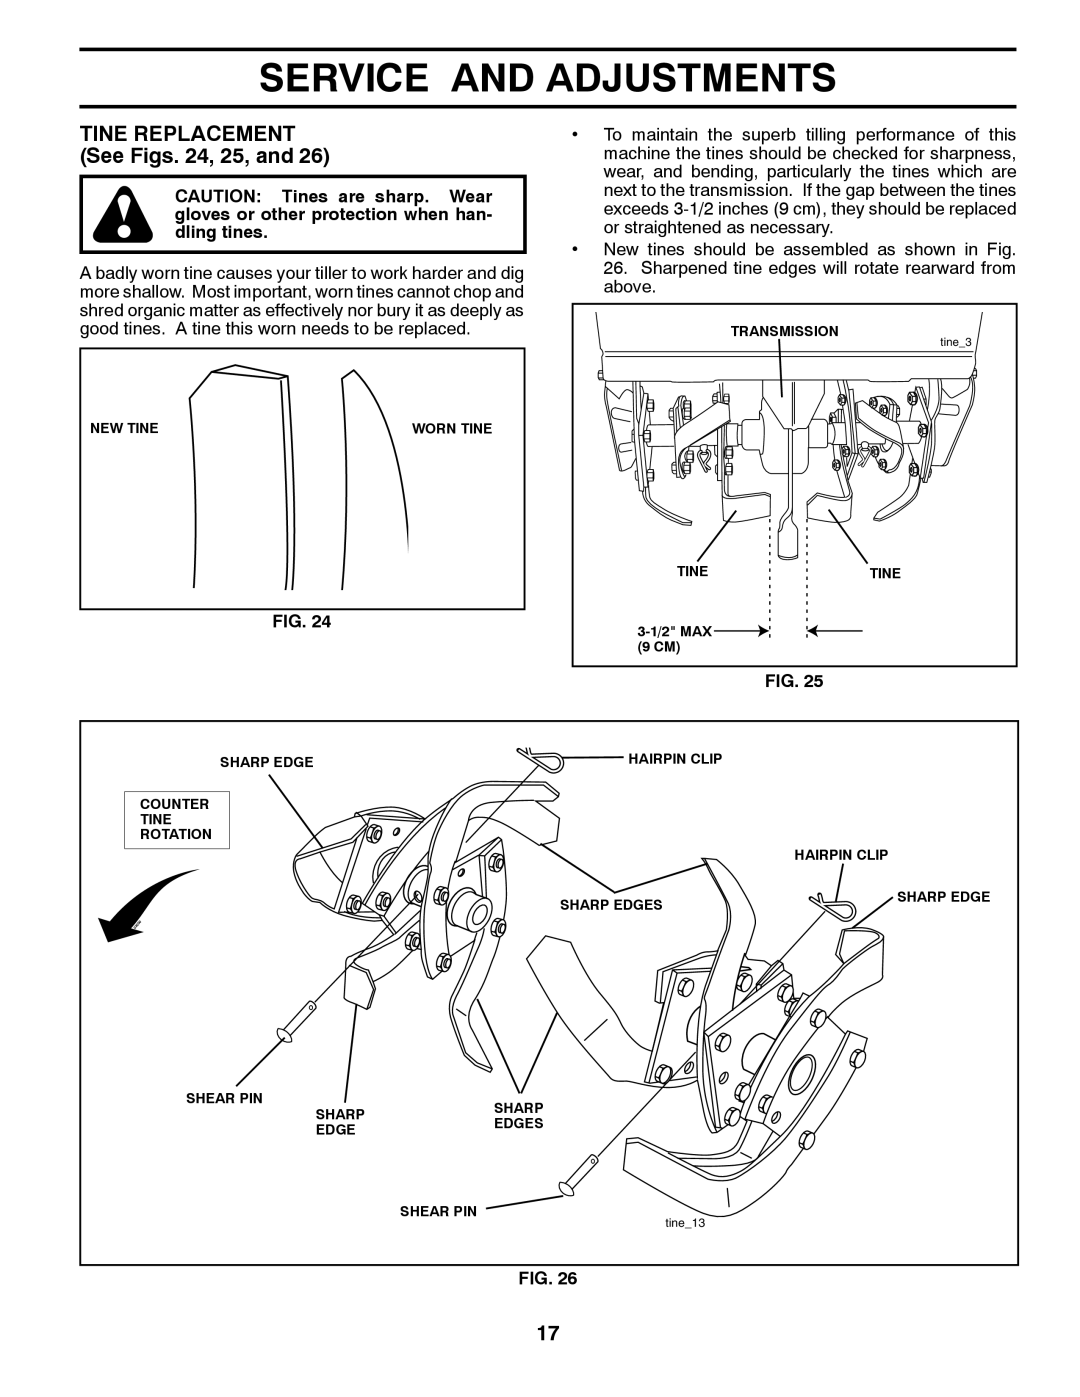 Poulan 423813 manual TINE REPLACEMENT See Figs. 24, 25, and, Service And Adjustments 